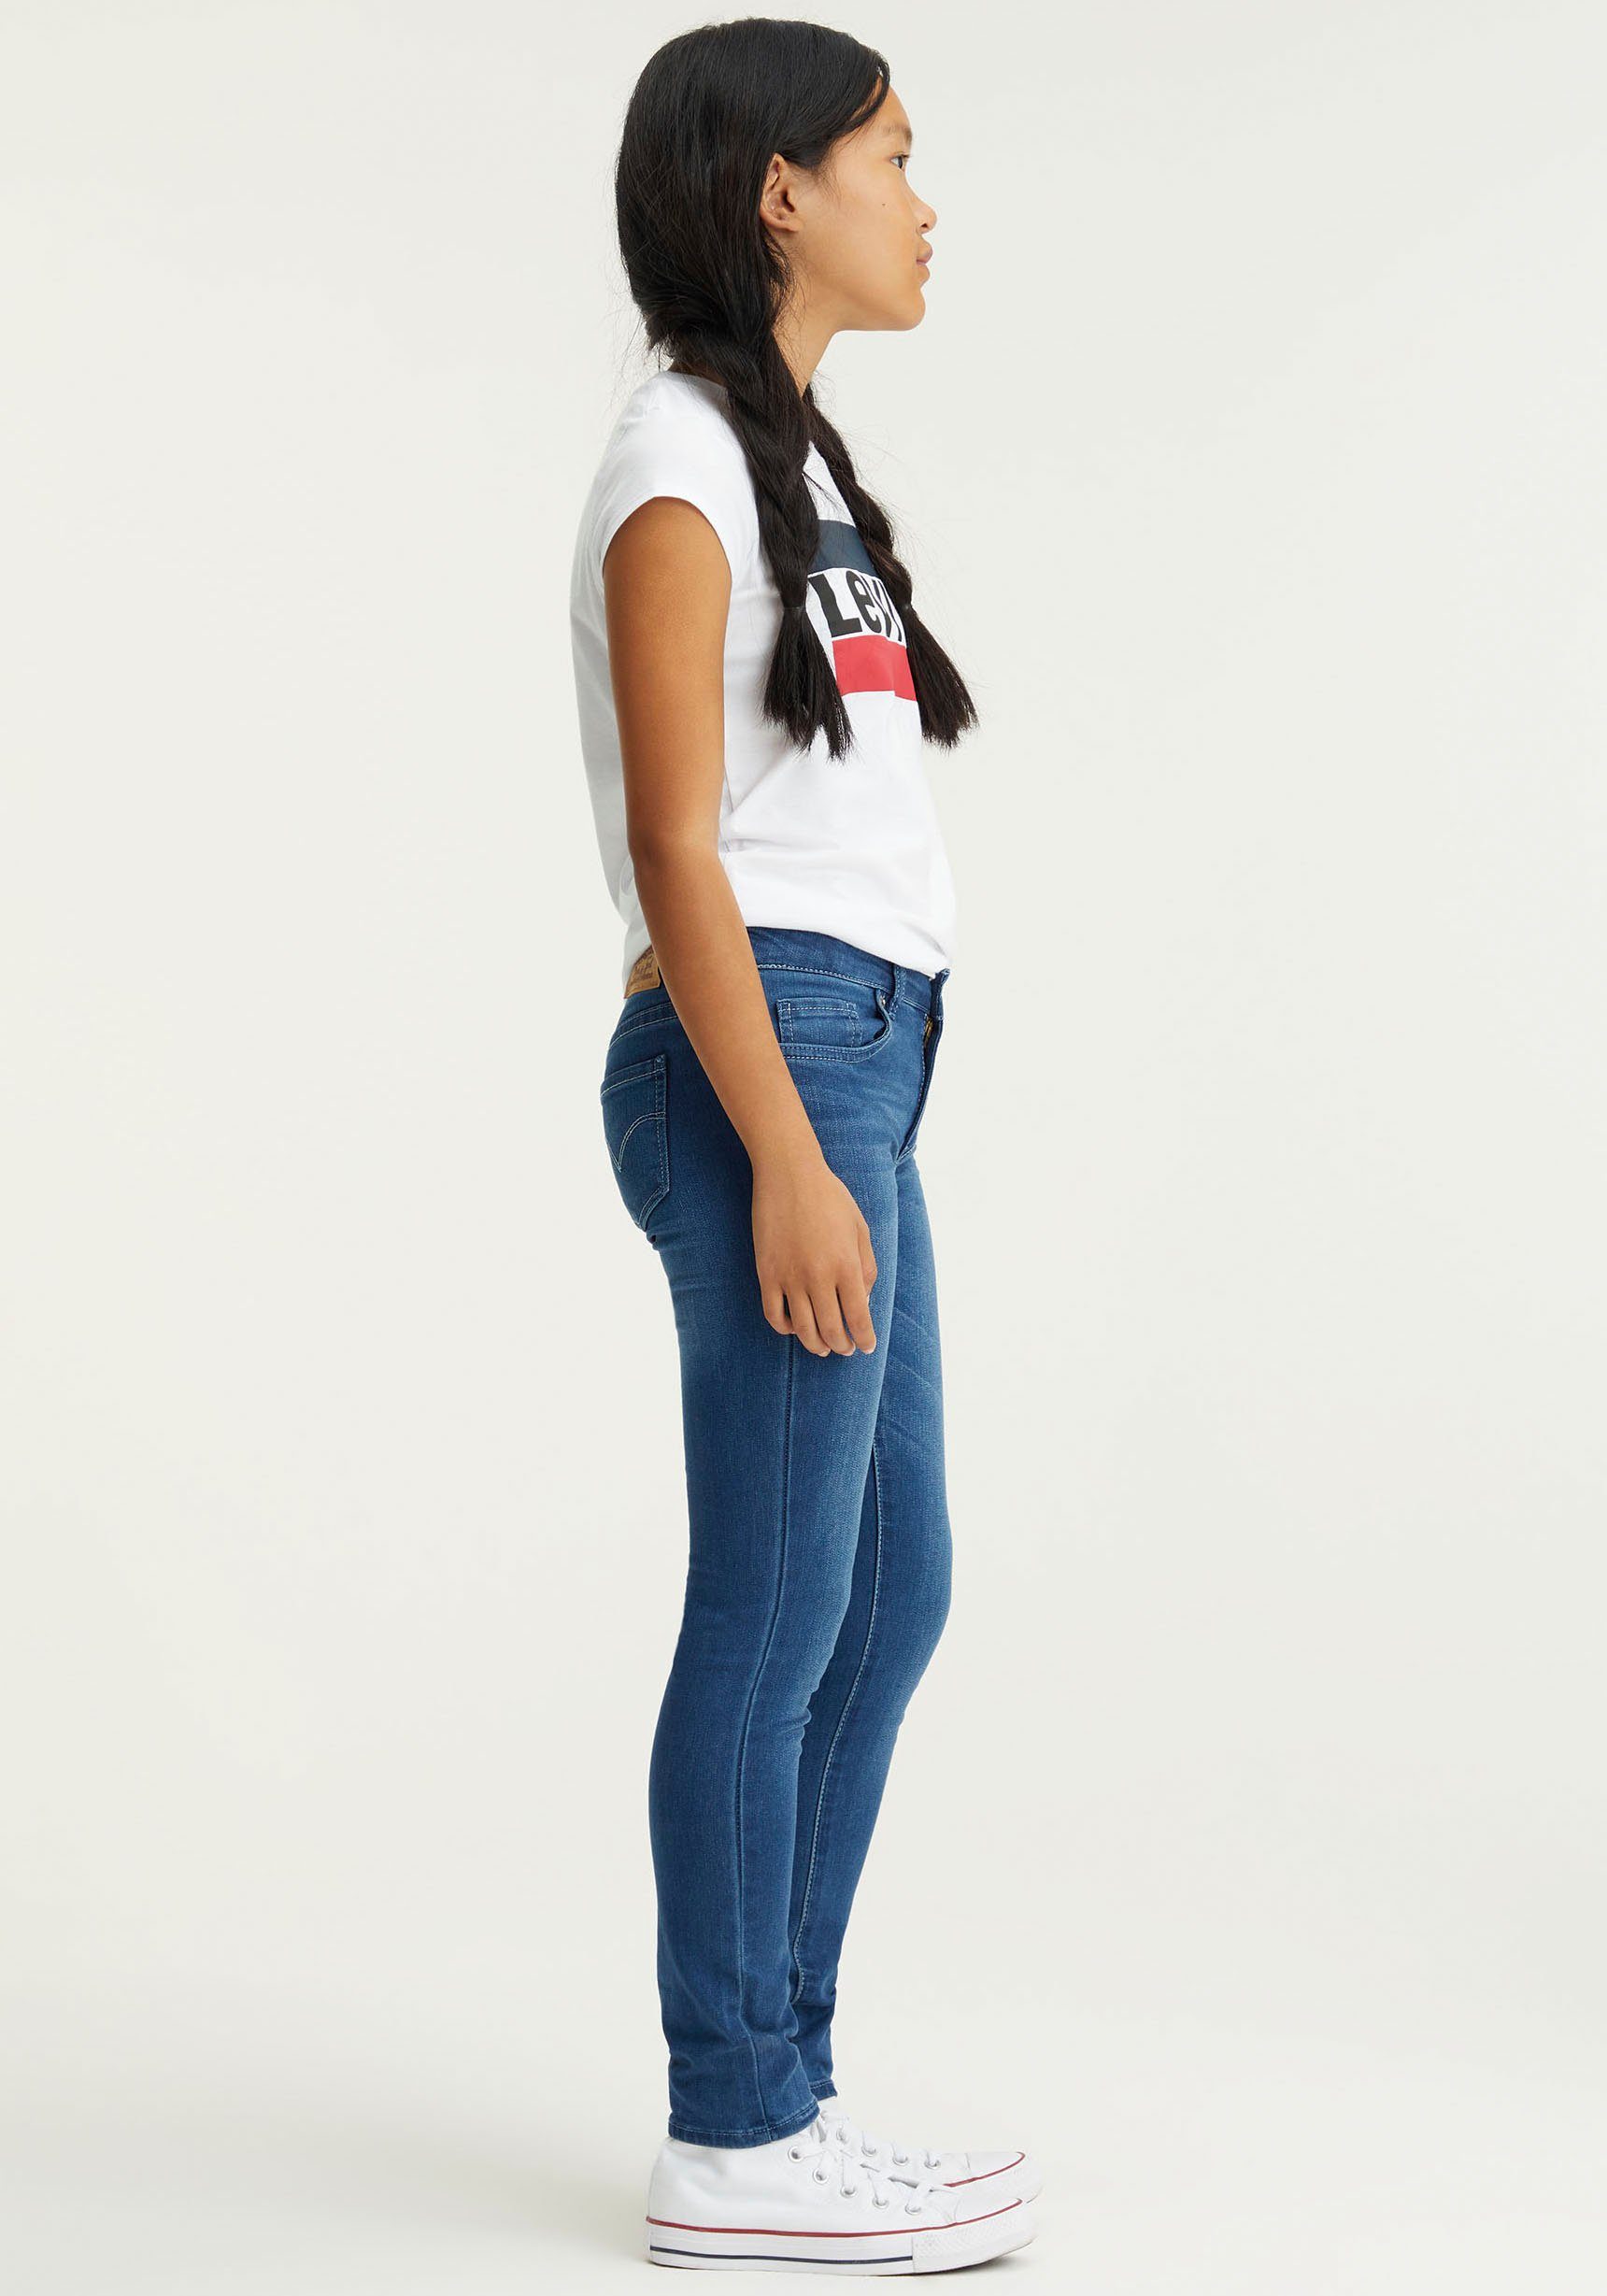 Stretch-Jeans 711™ for Levi's® JEANS SKINNY GIRLS Kids FIT